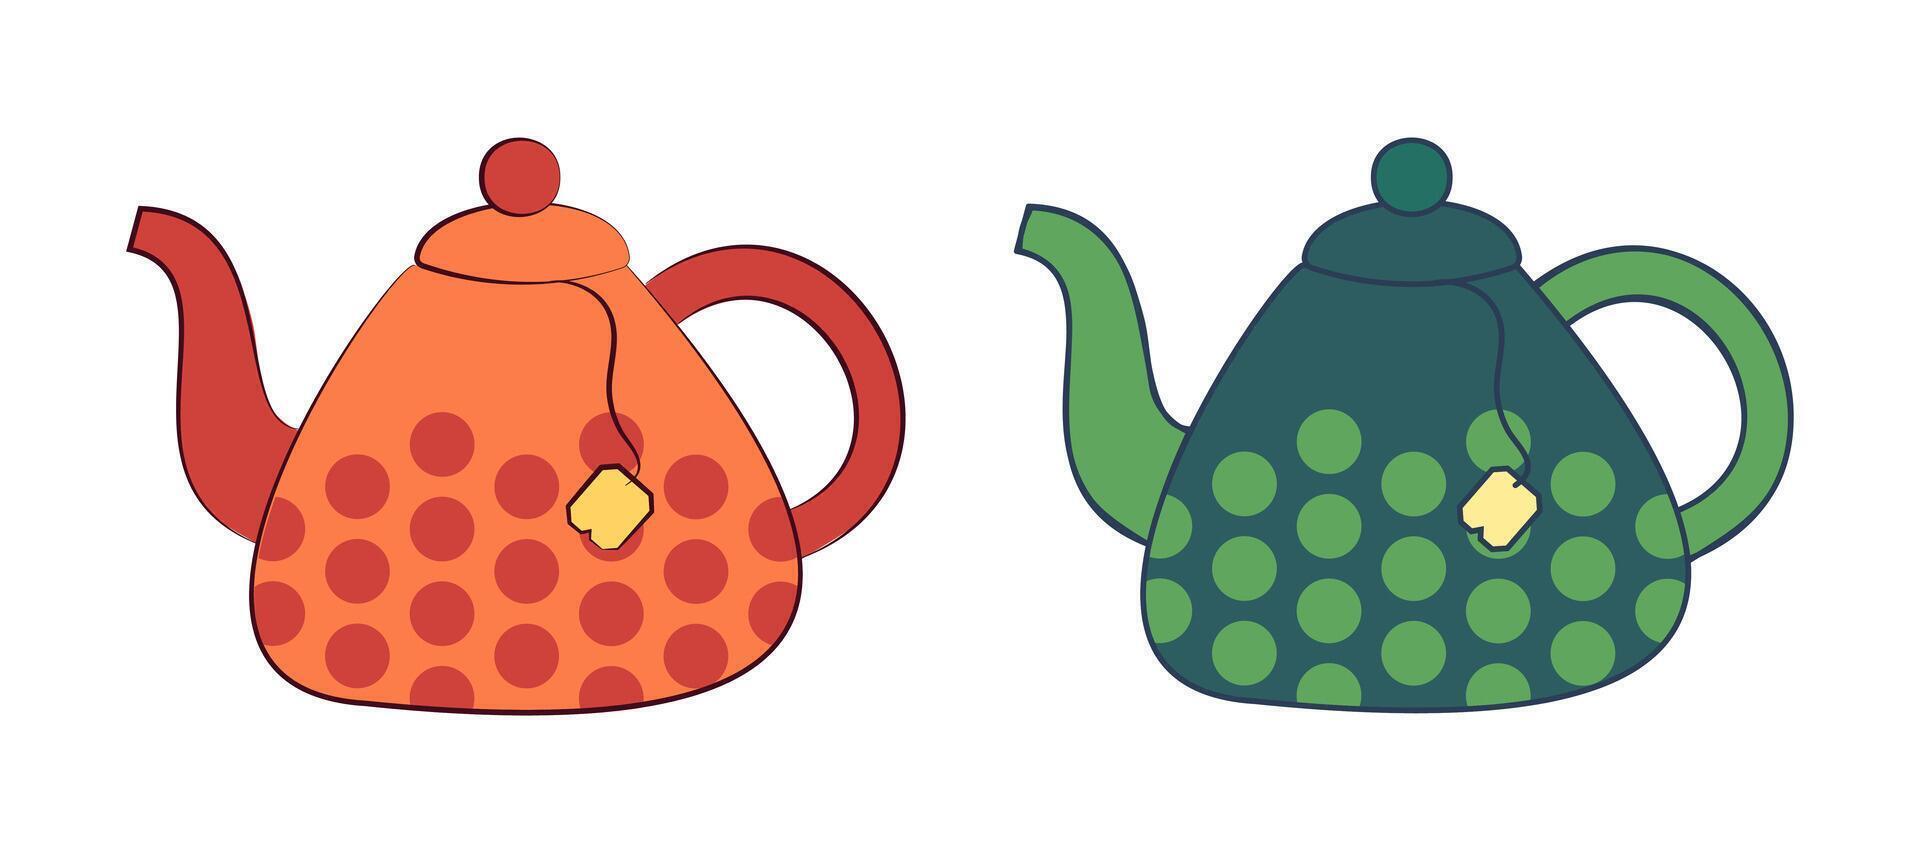 A collection of teapots with different stroke widths. Crockery with a pattern of circles. Tea bag in the kettle. vector